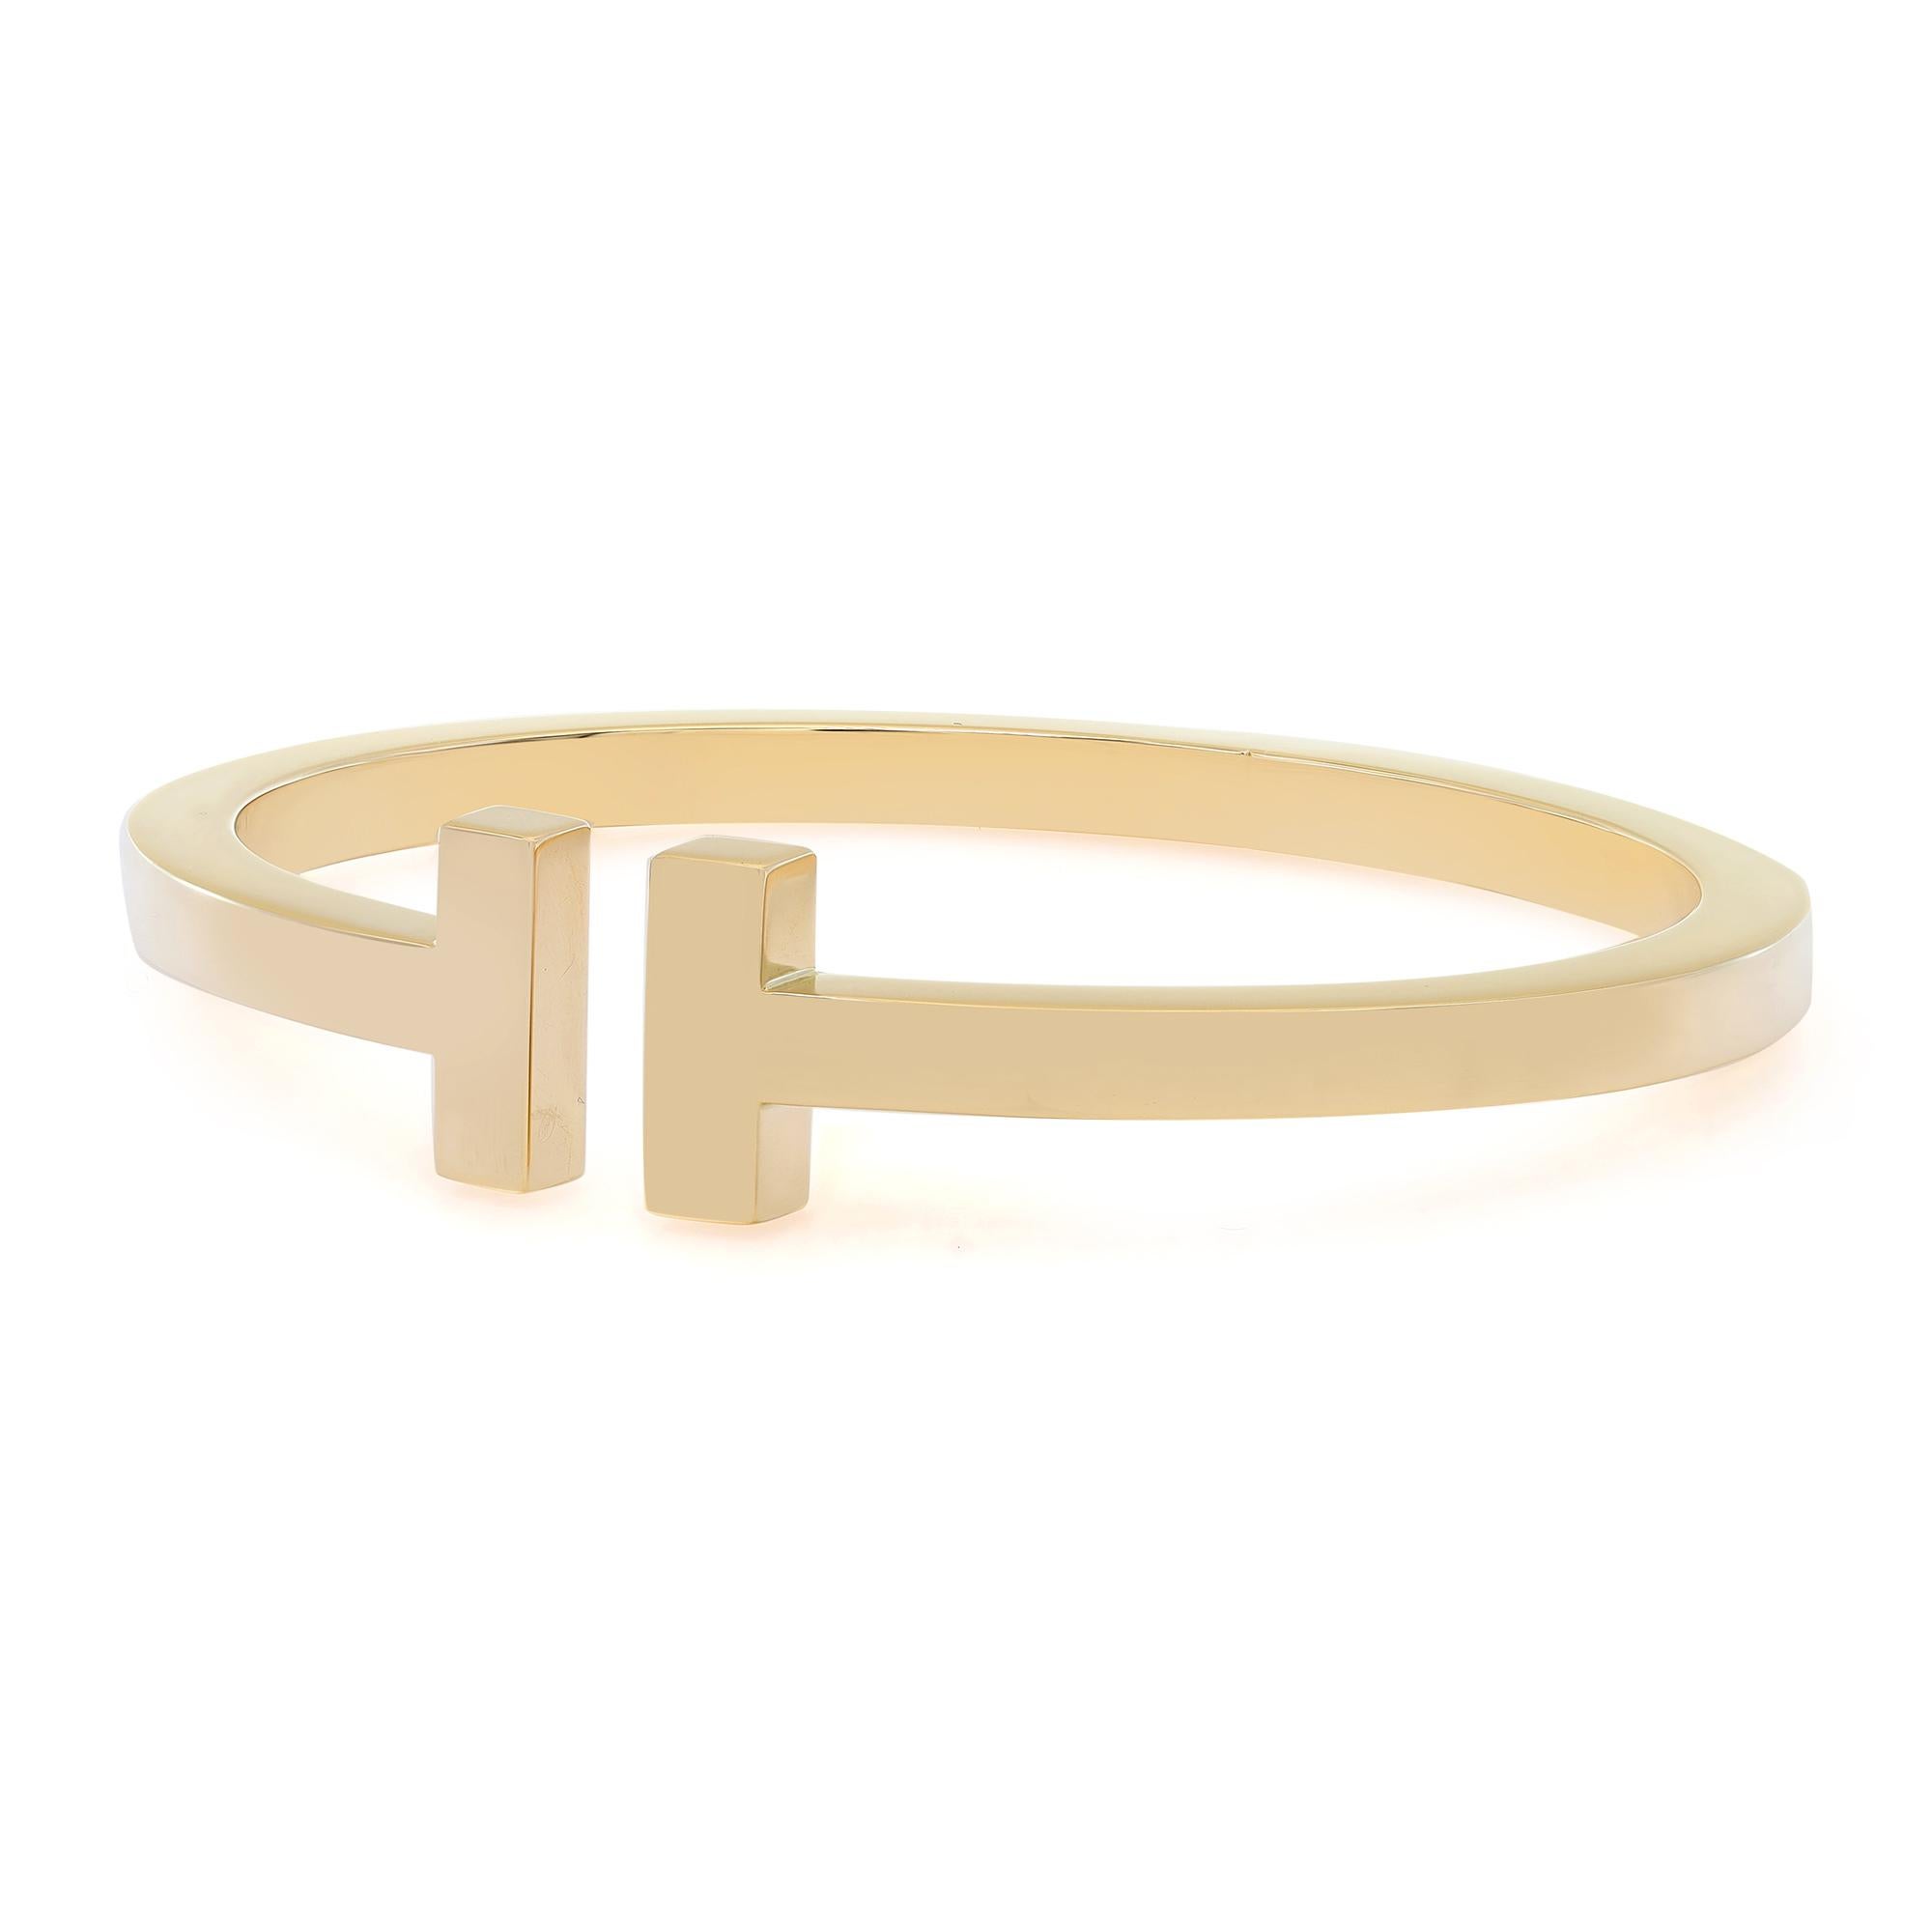 This bold Tiffany & Co. bracelet exudes sophistication. The Tiffany T collection comes in a sleek bangle design, crafted in highly polished 18K yellow gold. Stackable bracelet for a modern look. Size: large. Fits wrists up to 6.75 inches. Total